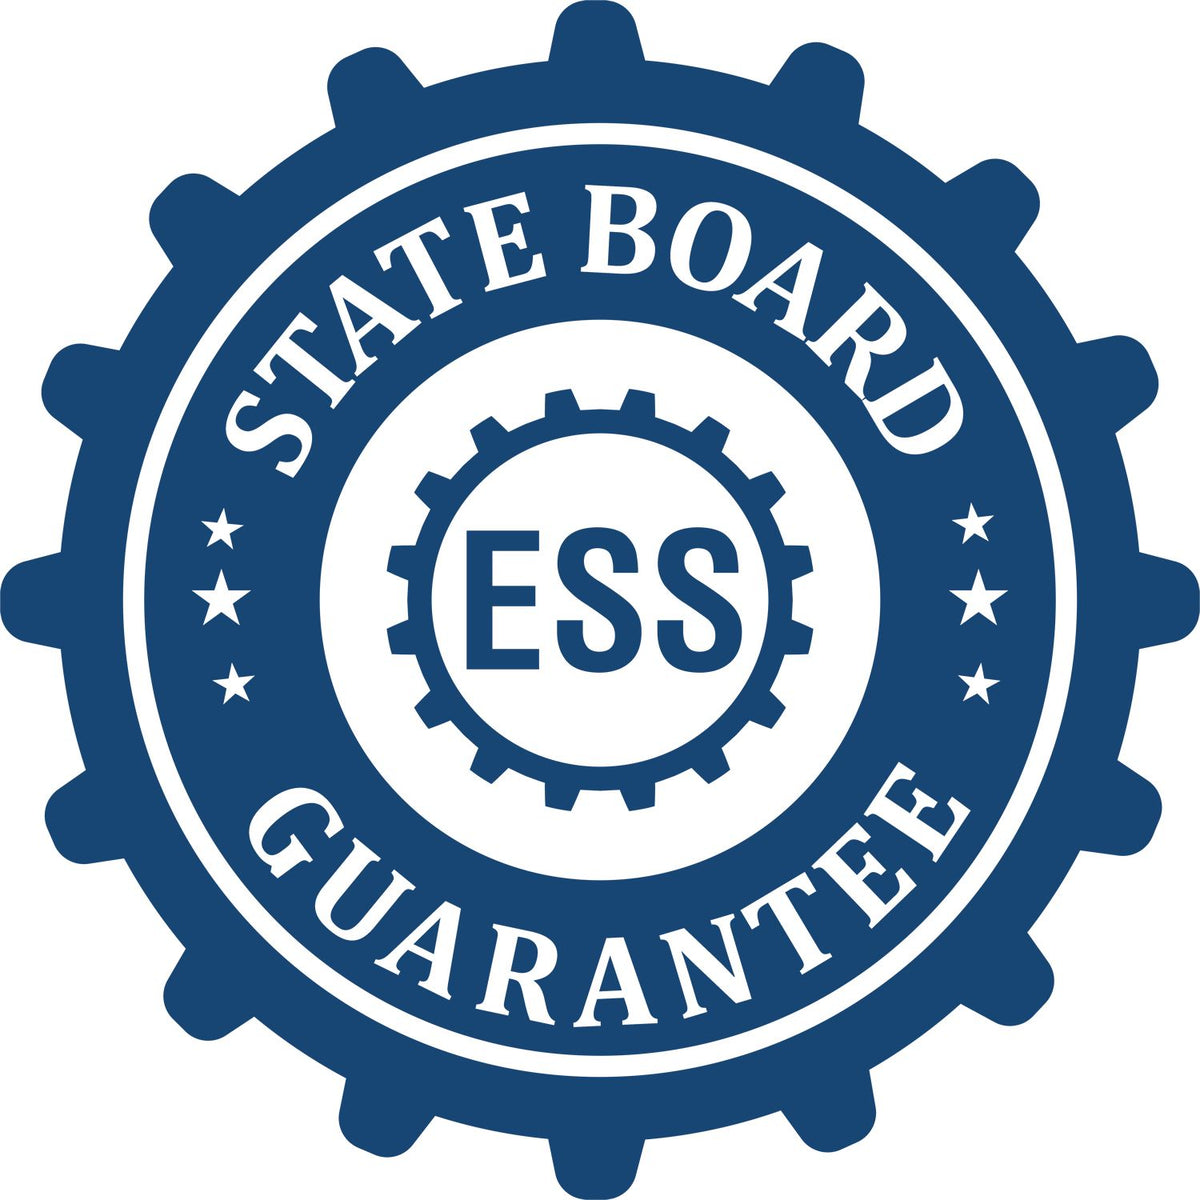 An emblem in a gear shape illustrating a state board guarantee for the Colorado Desk Architect Embossing Seal product.